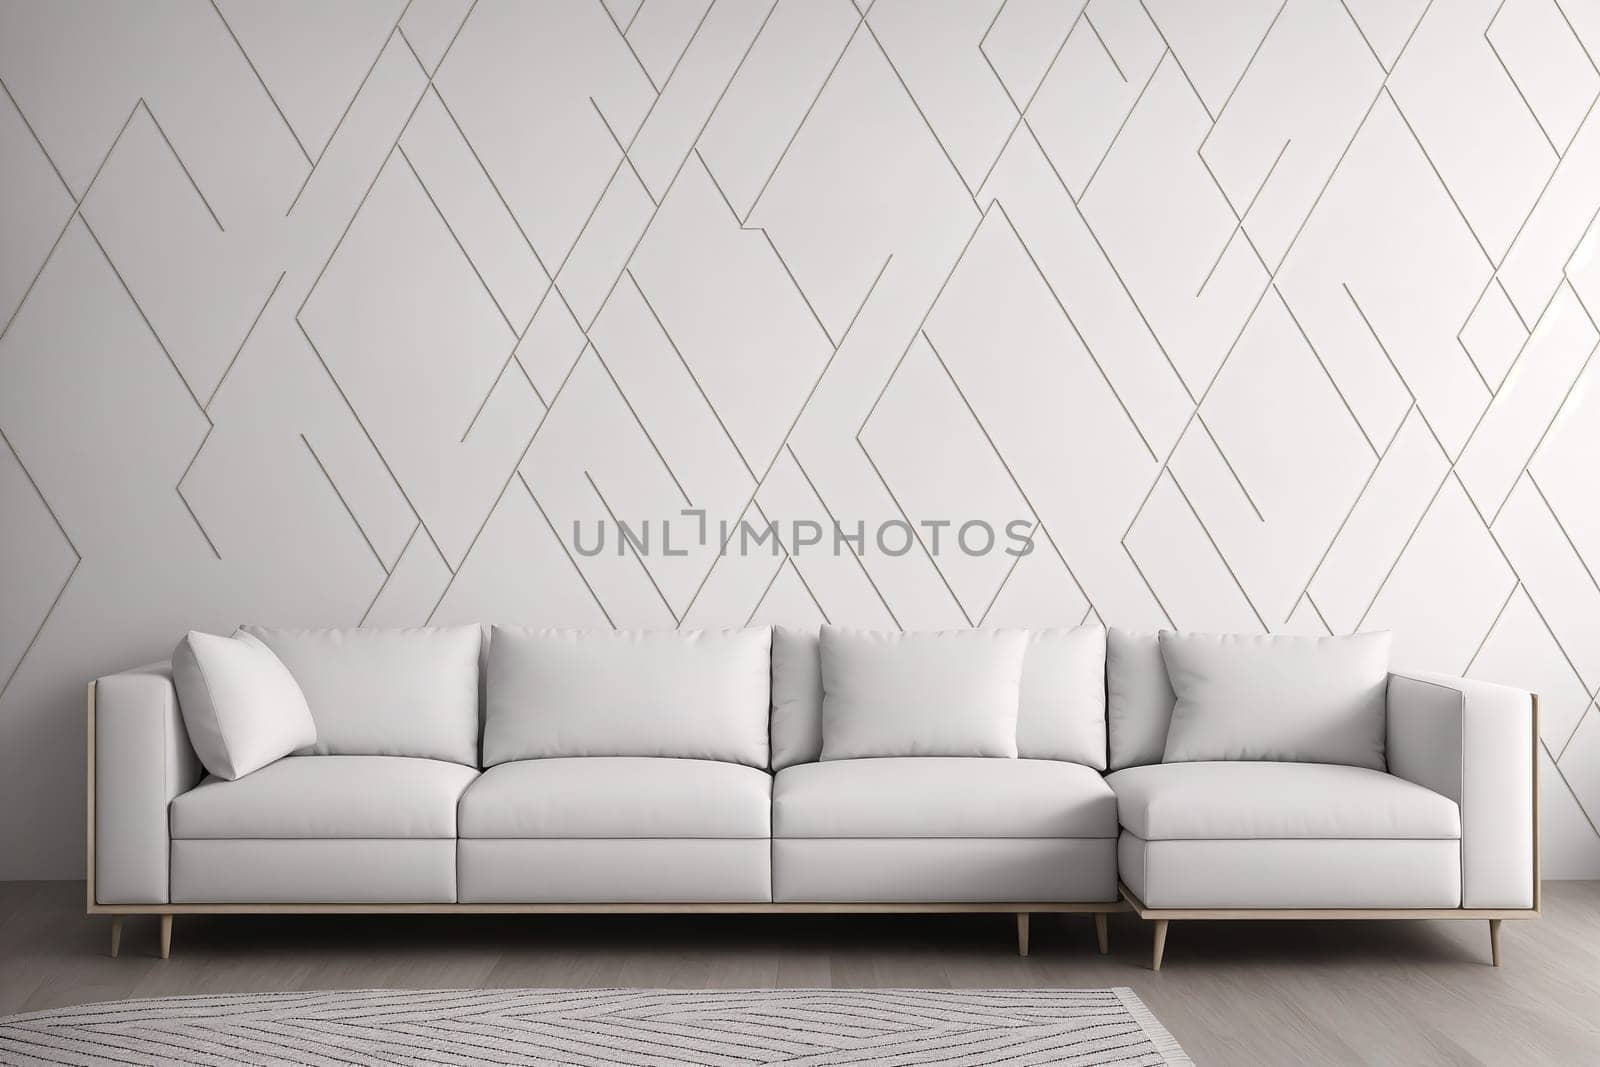 The image is a white couch sitting in front of a beige wall with a geometric pattern.